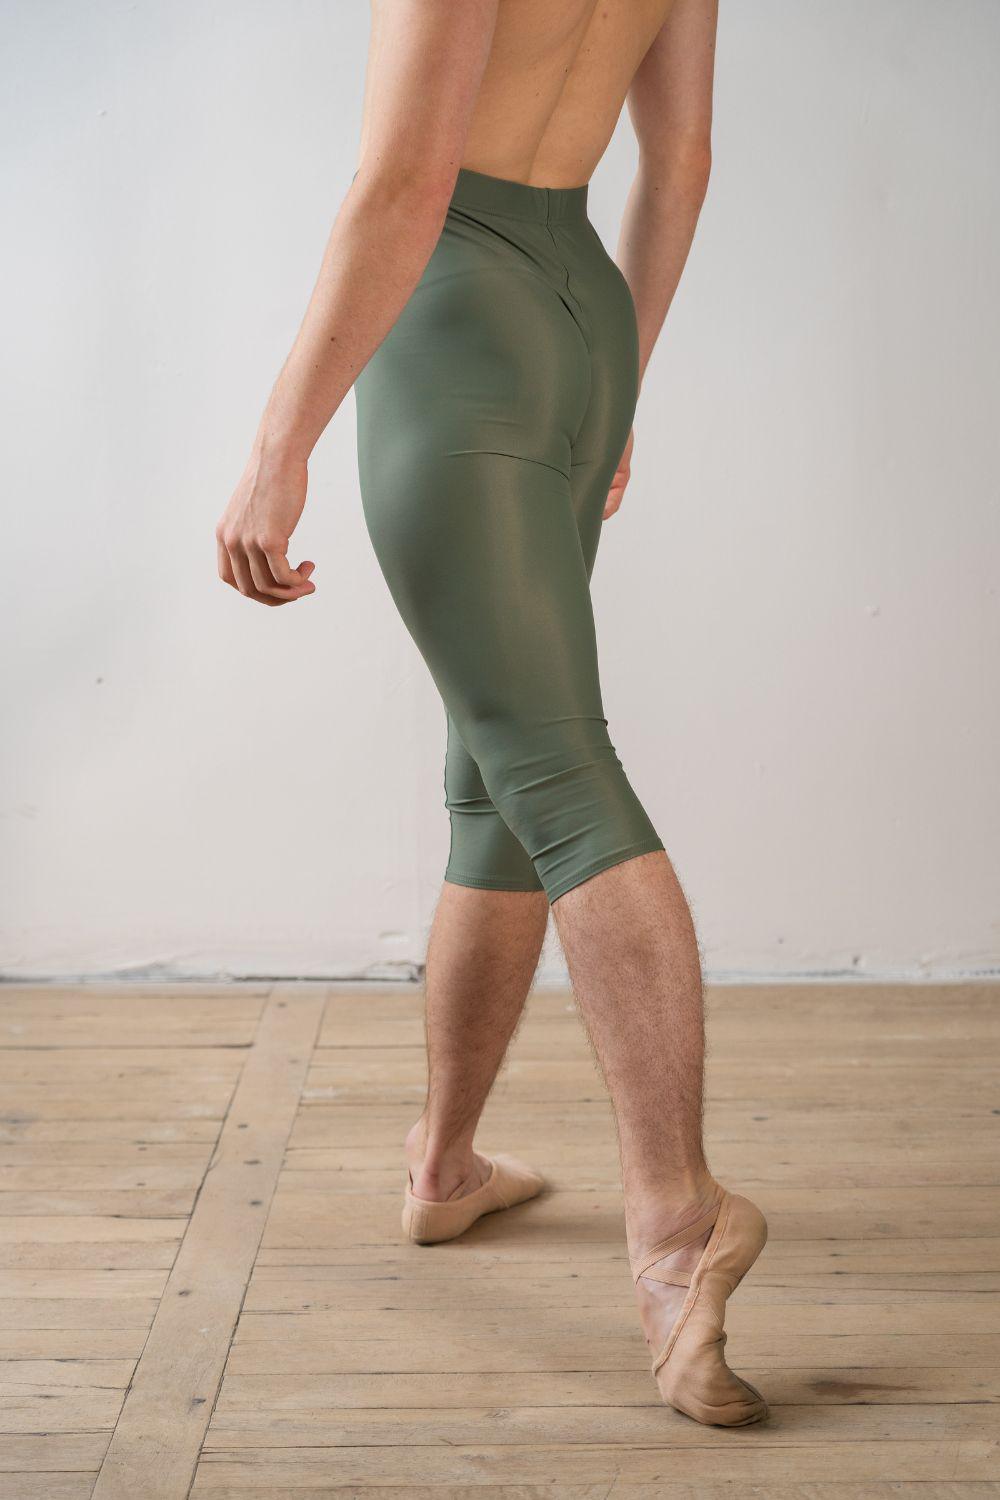 Men's Below Knee Dance Tights - Army Green-Men's Ballet Tights Sustainable-Imperfect Pointes- Modbury